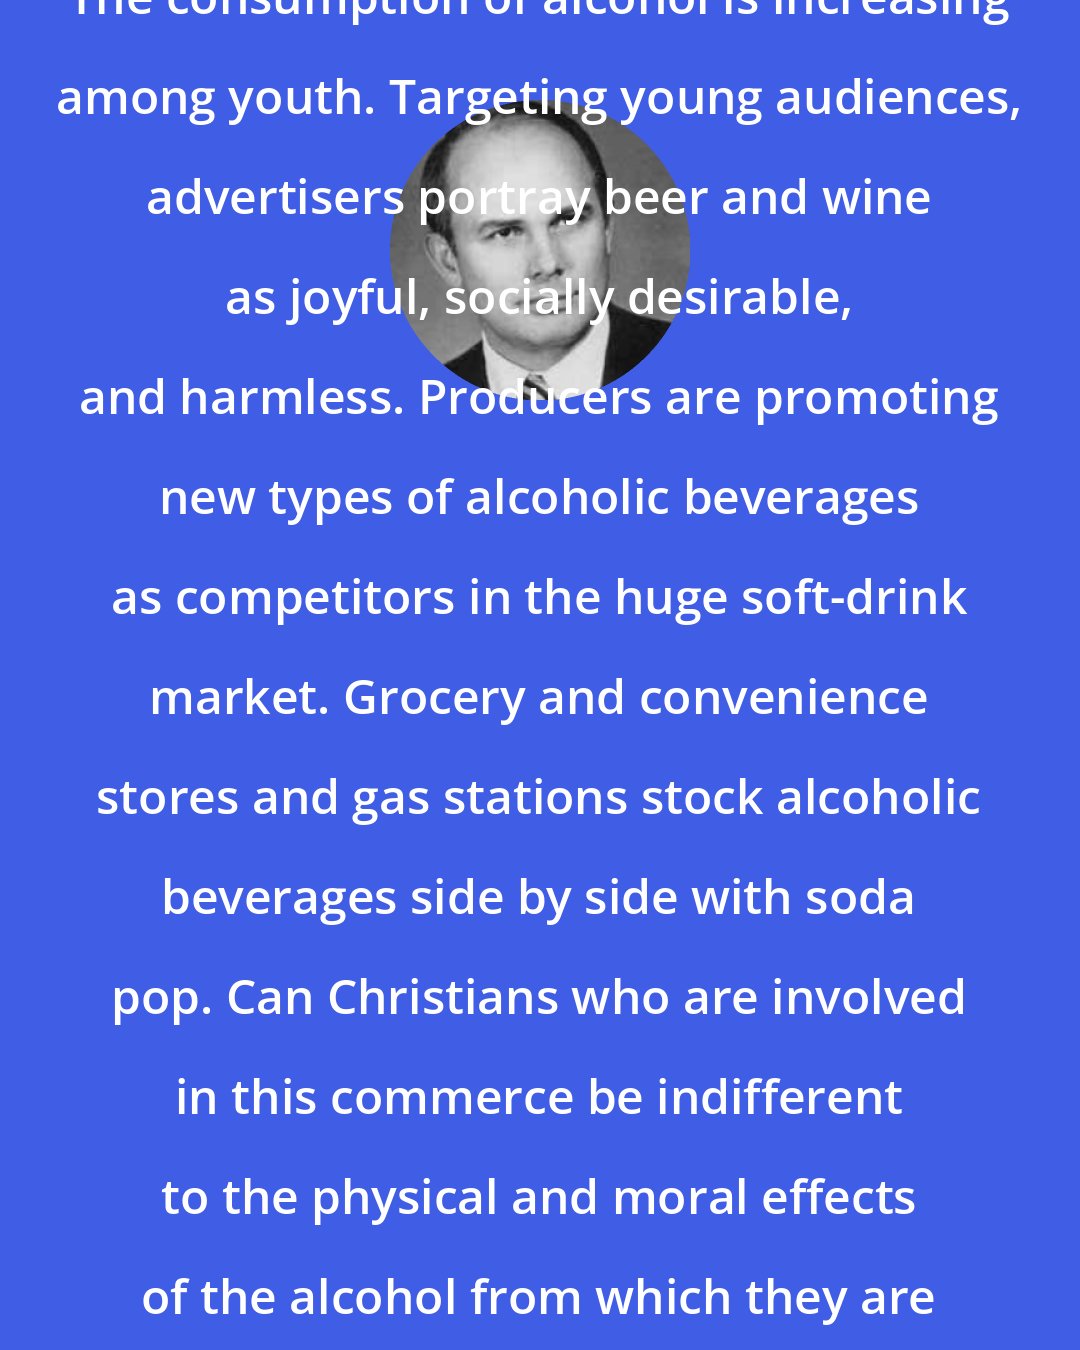 Dallin H. Oaks: The consumption of alcohol is increasing among youth. Targeting young audiences, advertisers portray beer and wine as joyful, socially desirable, and harmless. Producers are promoting new types of alcoholic beverages as competitors in the huge soft-drink market. Grocery and convenience stores and gas stations stock alcoholic beverages side by side with soda pop. Can Christians who are involved in this commerce be indifferent to the physical and moral effects of the alcohol from which they are making their profits?